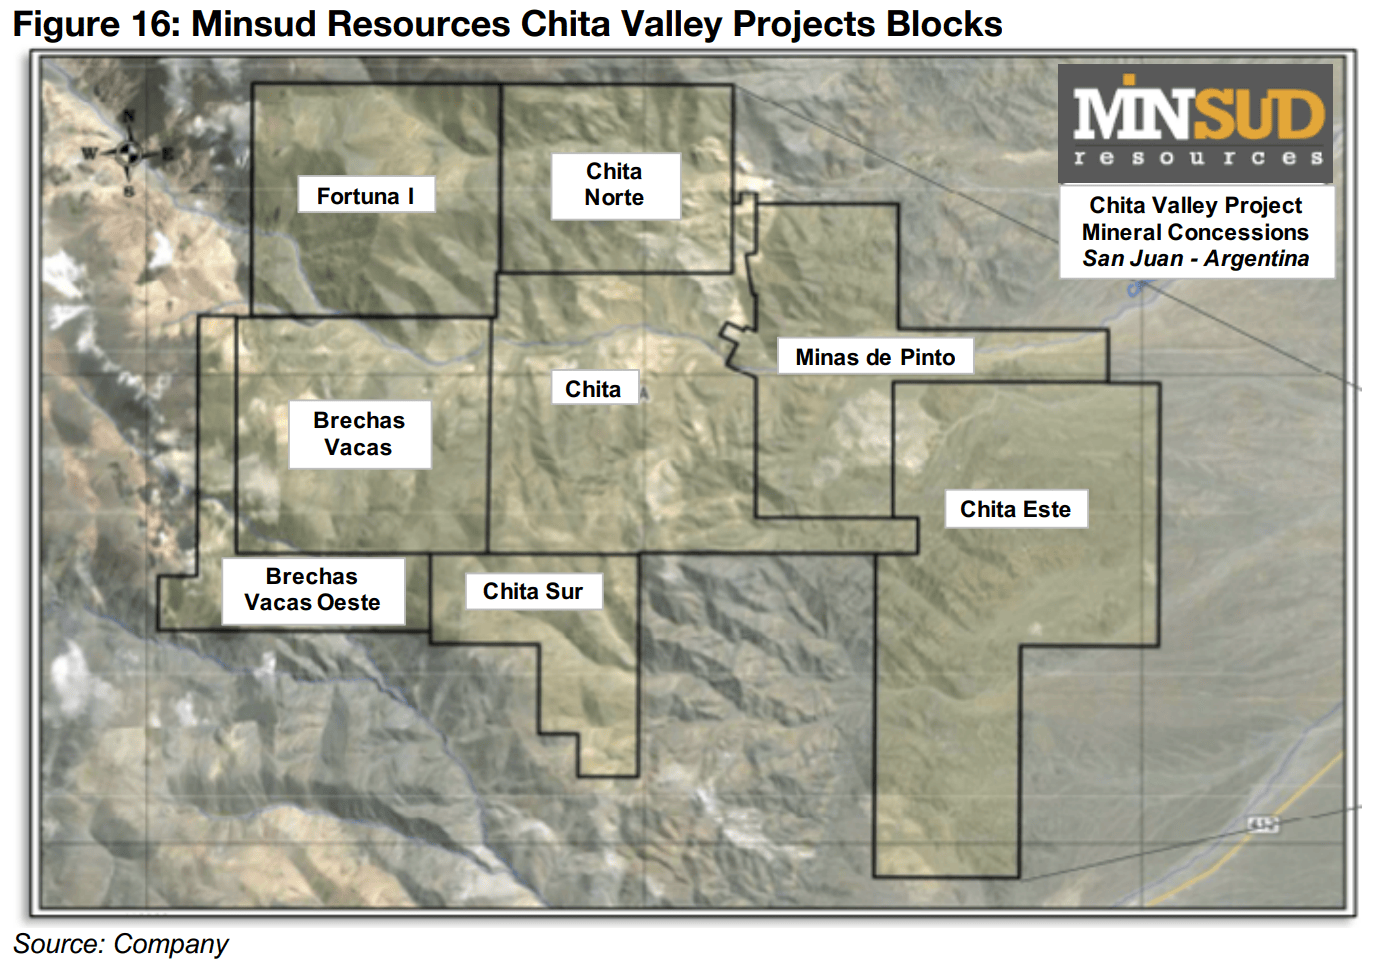 Strong drill results this year from Chita Valley Project